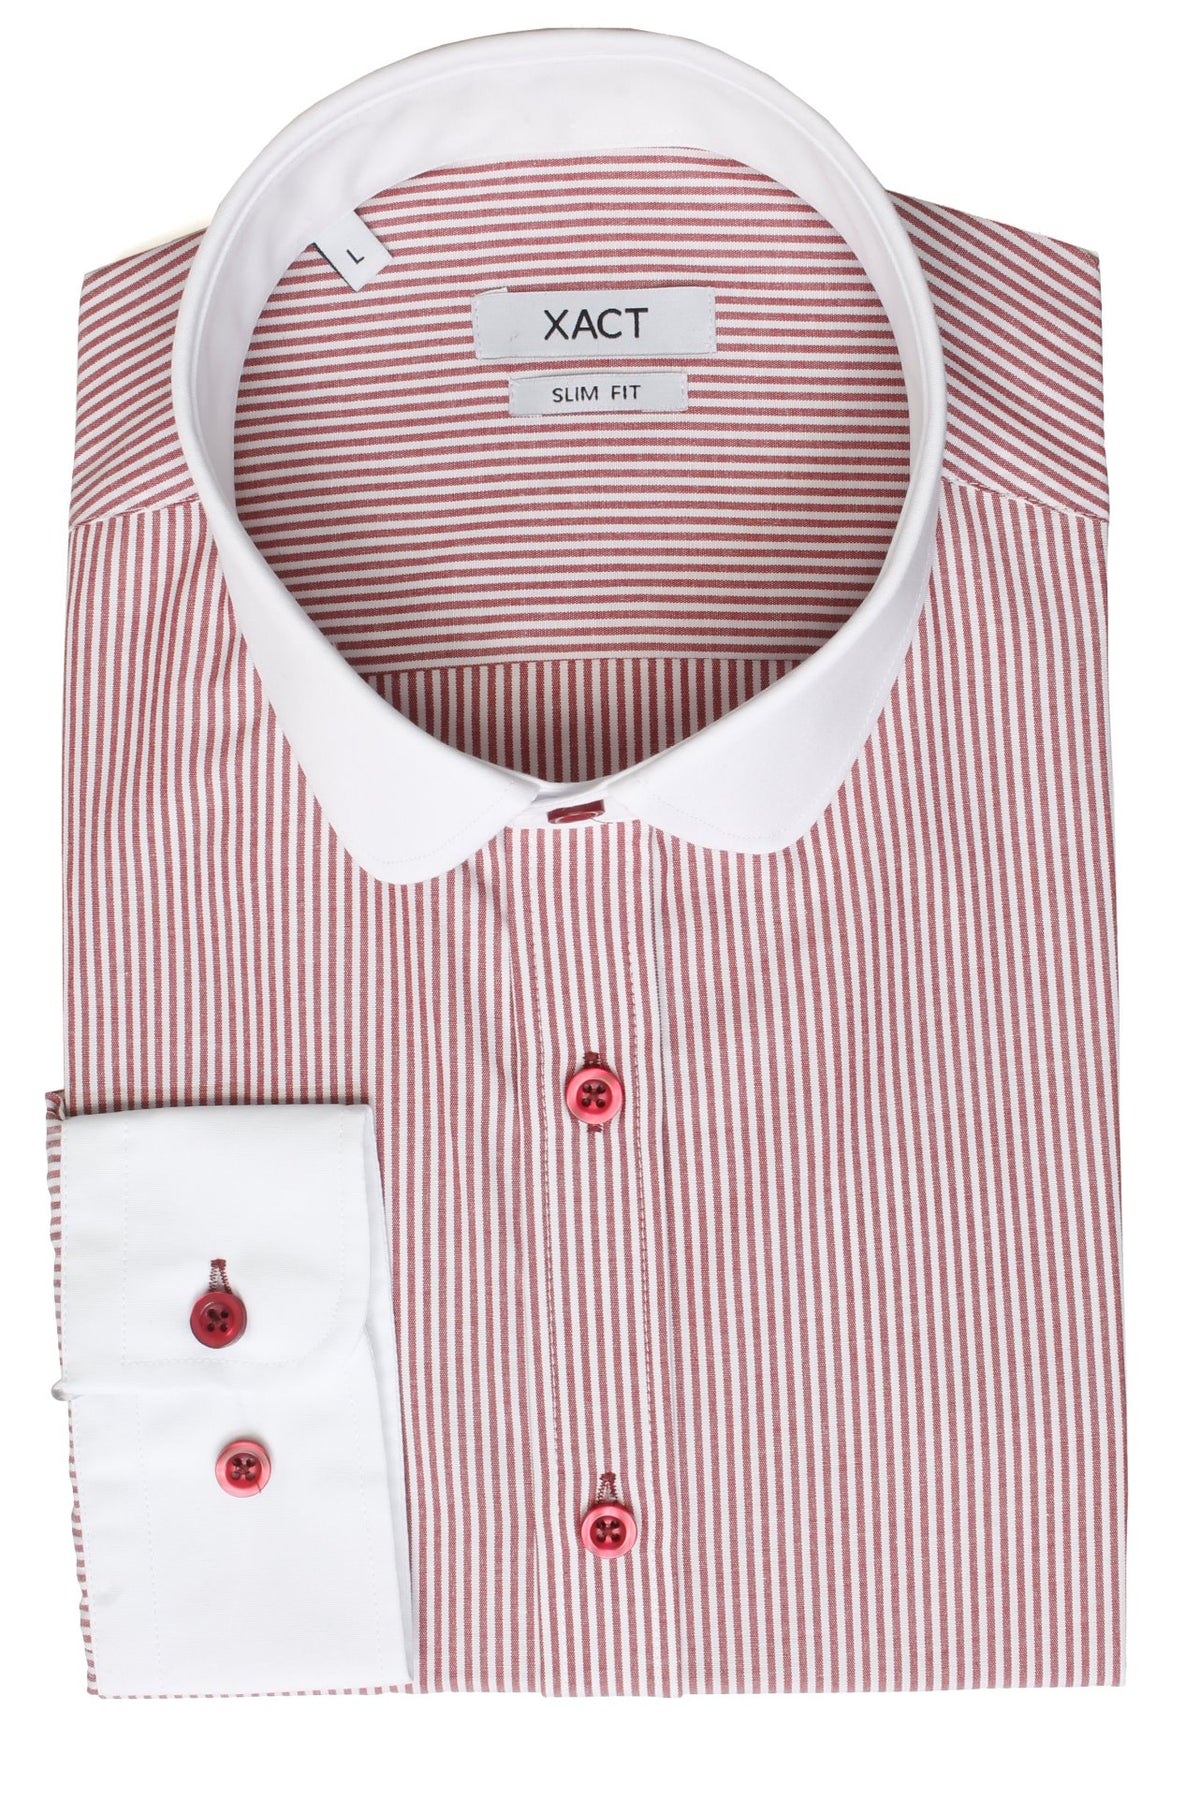 Xact Men's Long-Sleeved Striped Shirt with White Penny/Club Collar and White Cuffs, 04, Xsh1092, White Collar - Dark Red Stripe